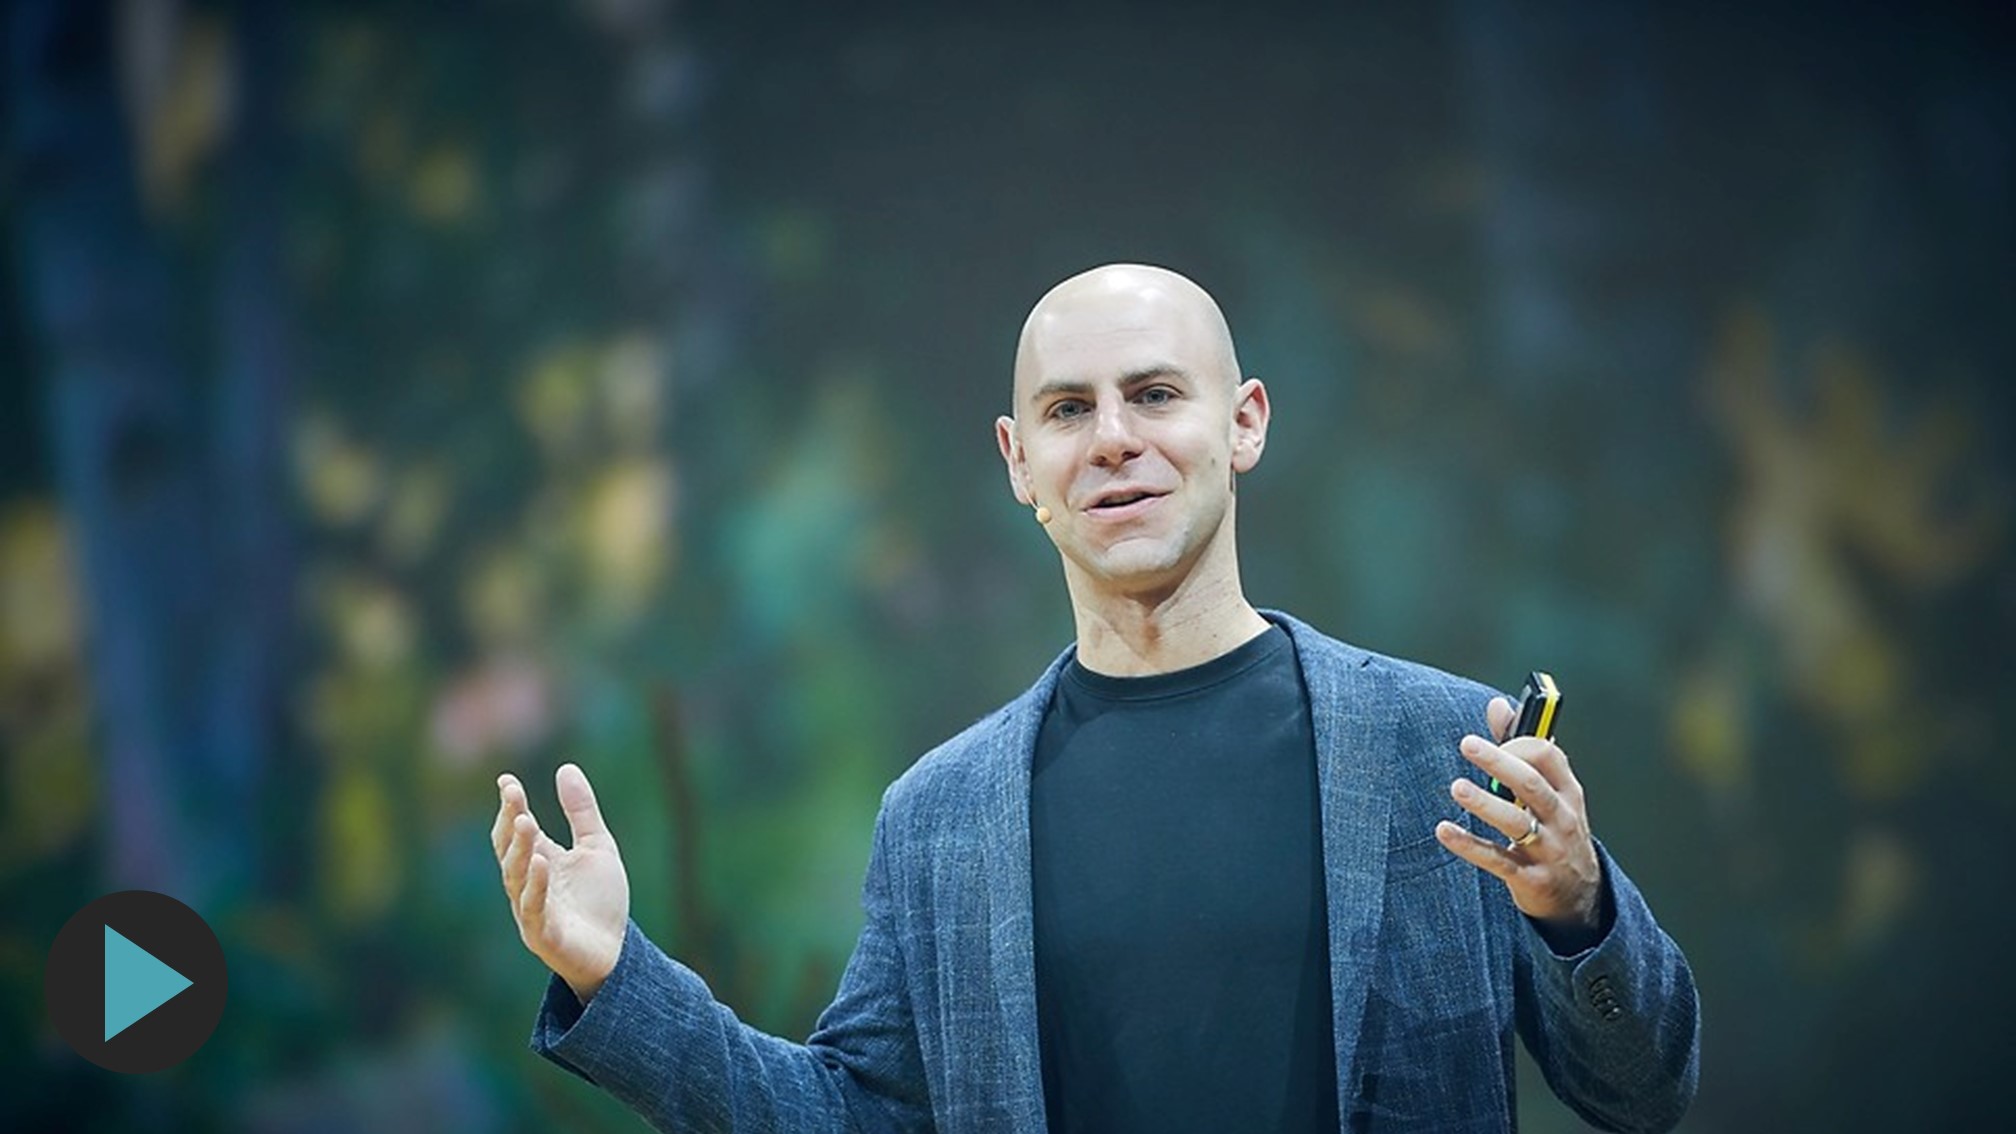 græs lejesoldat lækage Tim Harford Meets Adam Grant - The Power of Knowing What You Don't Know |  How To Academy